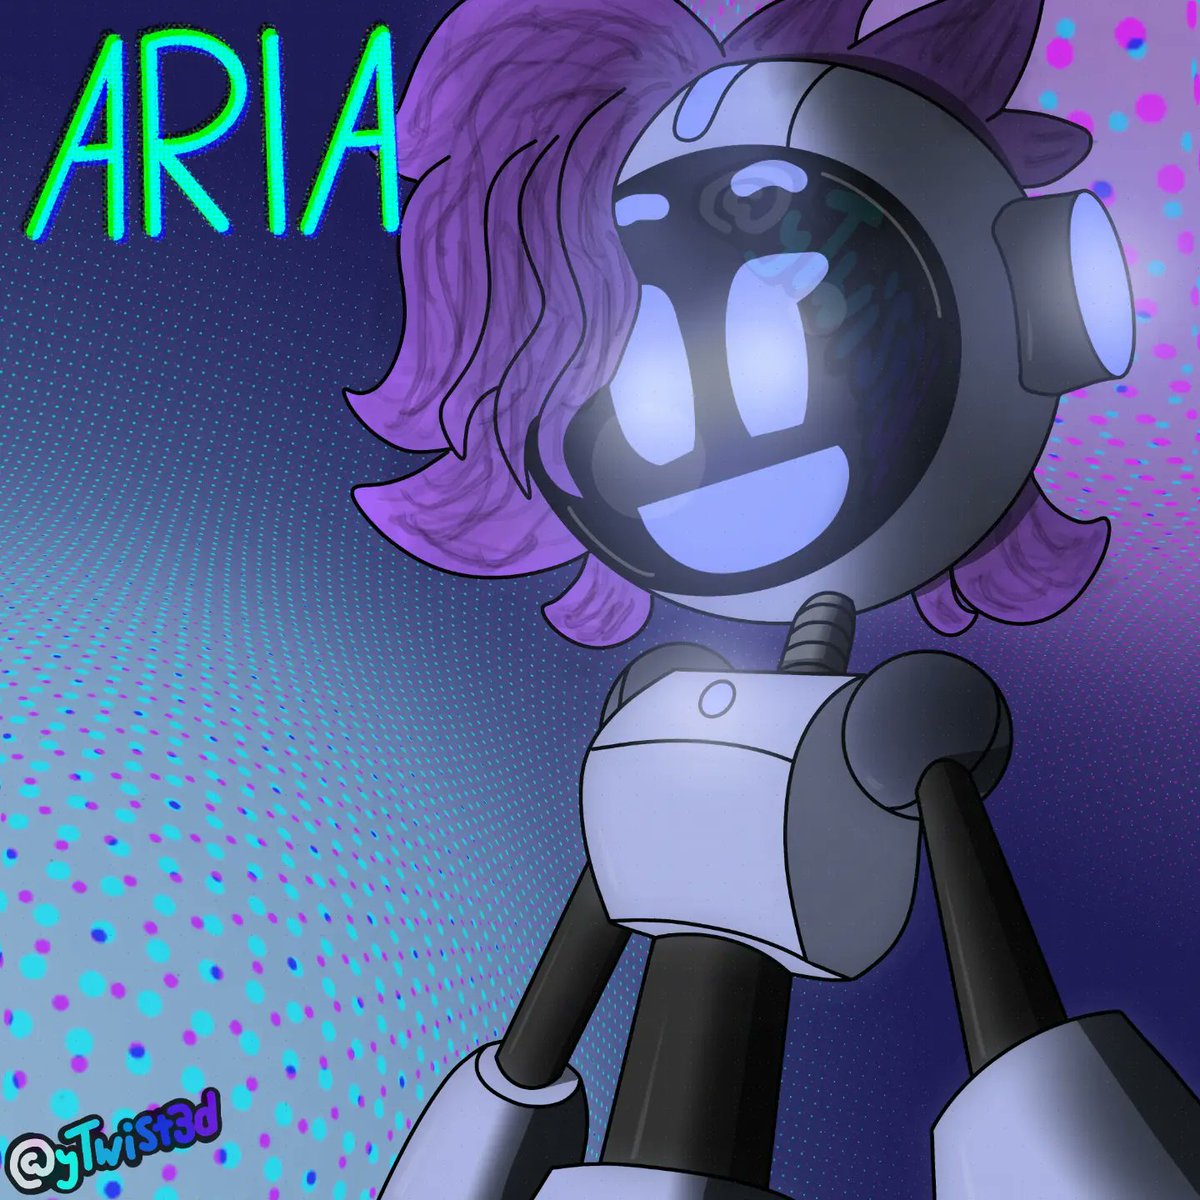 'ARIA'

(Check out this post on my Instagram for the description)

#art #robotart #ocart #Procreate